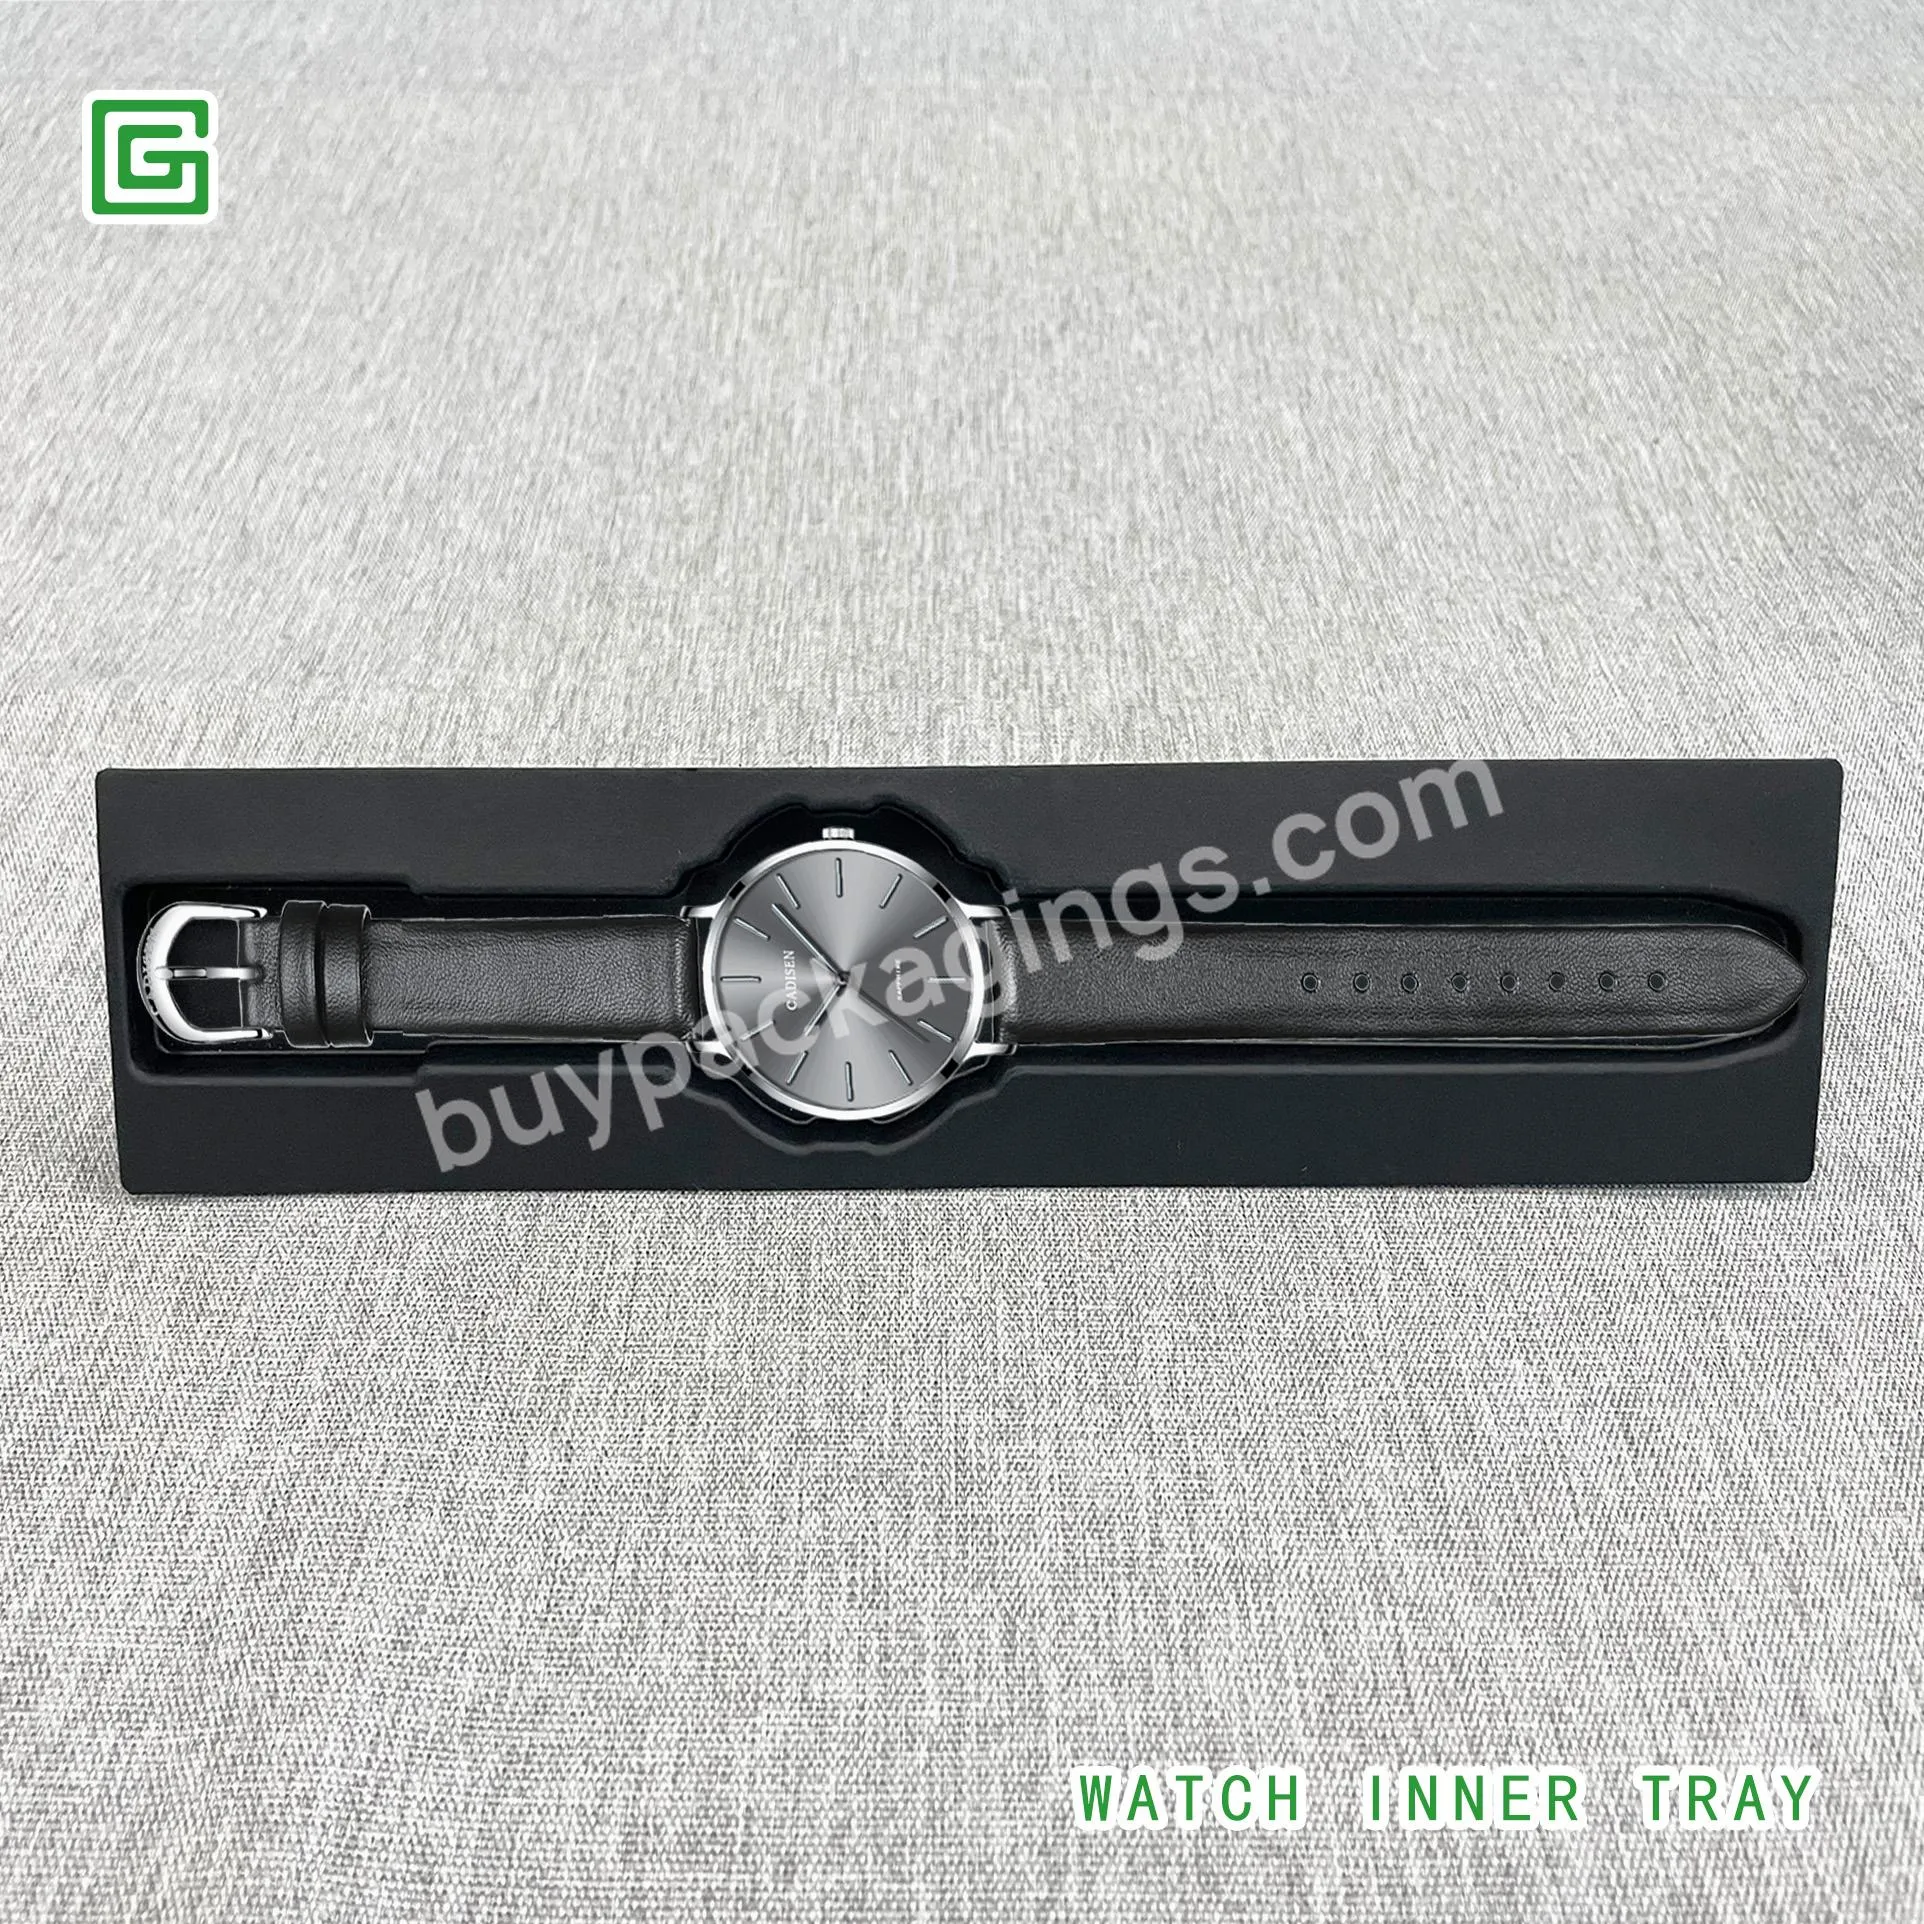 Popular Design Wet Press Embossing Foil Stamping Sugarcane Watch Paper Molded Pulp Insert Packaging - Buy Watch Protection Packaging,Watch Gift Box,Watch Packaging Tray.